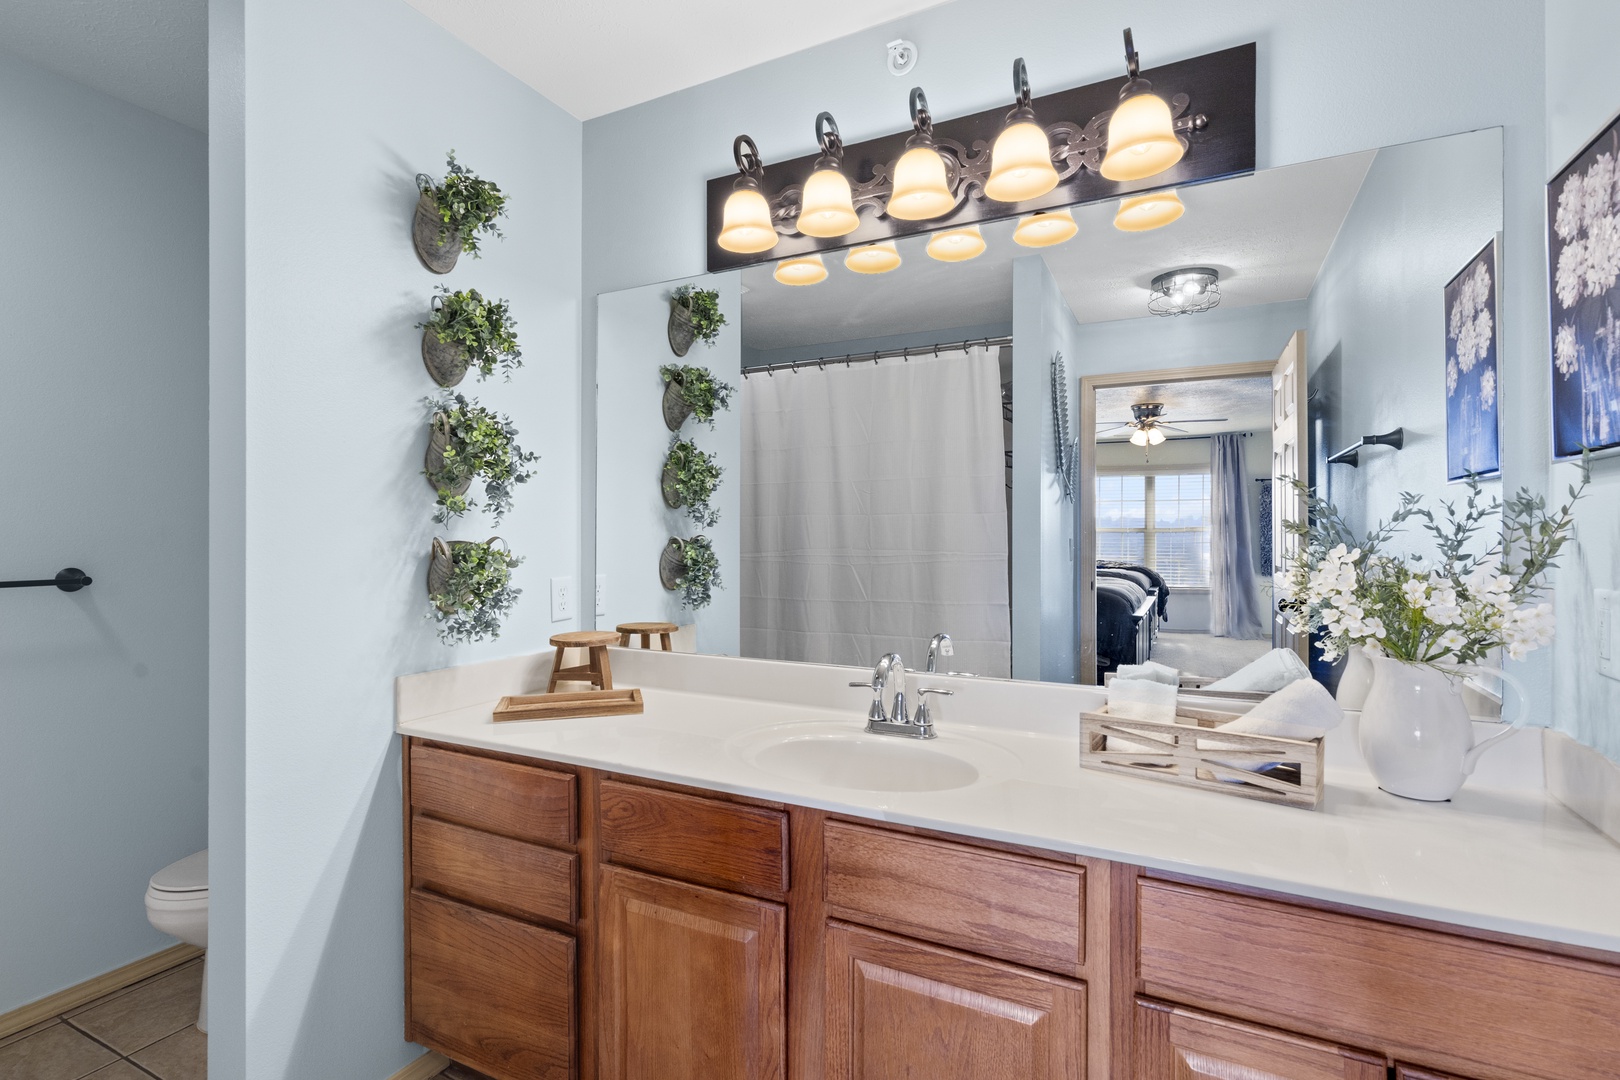 Enjoy an oversized single vanity & shower/tub combo in the master ensuite